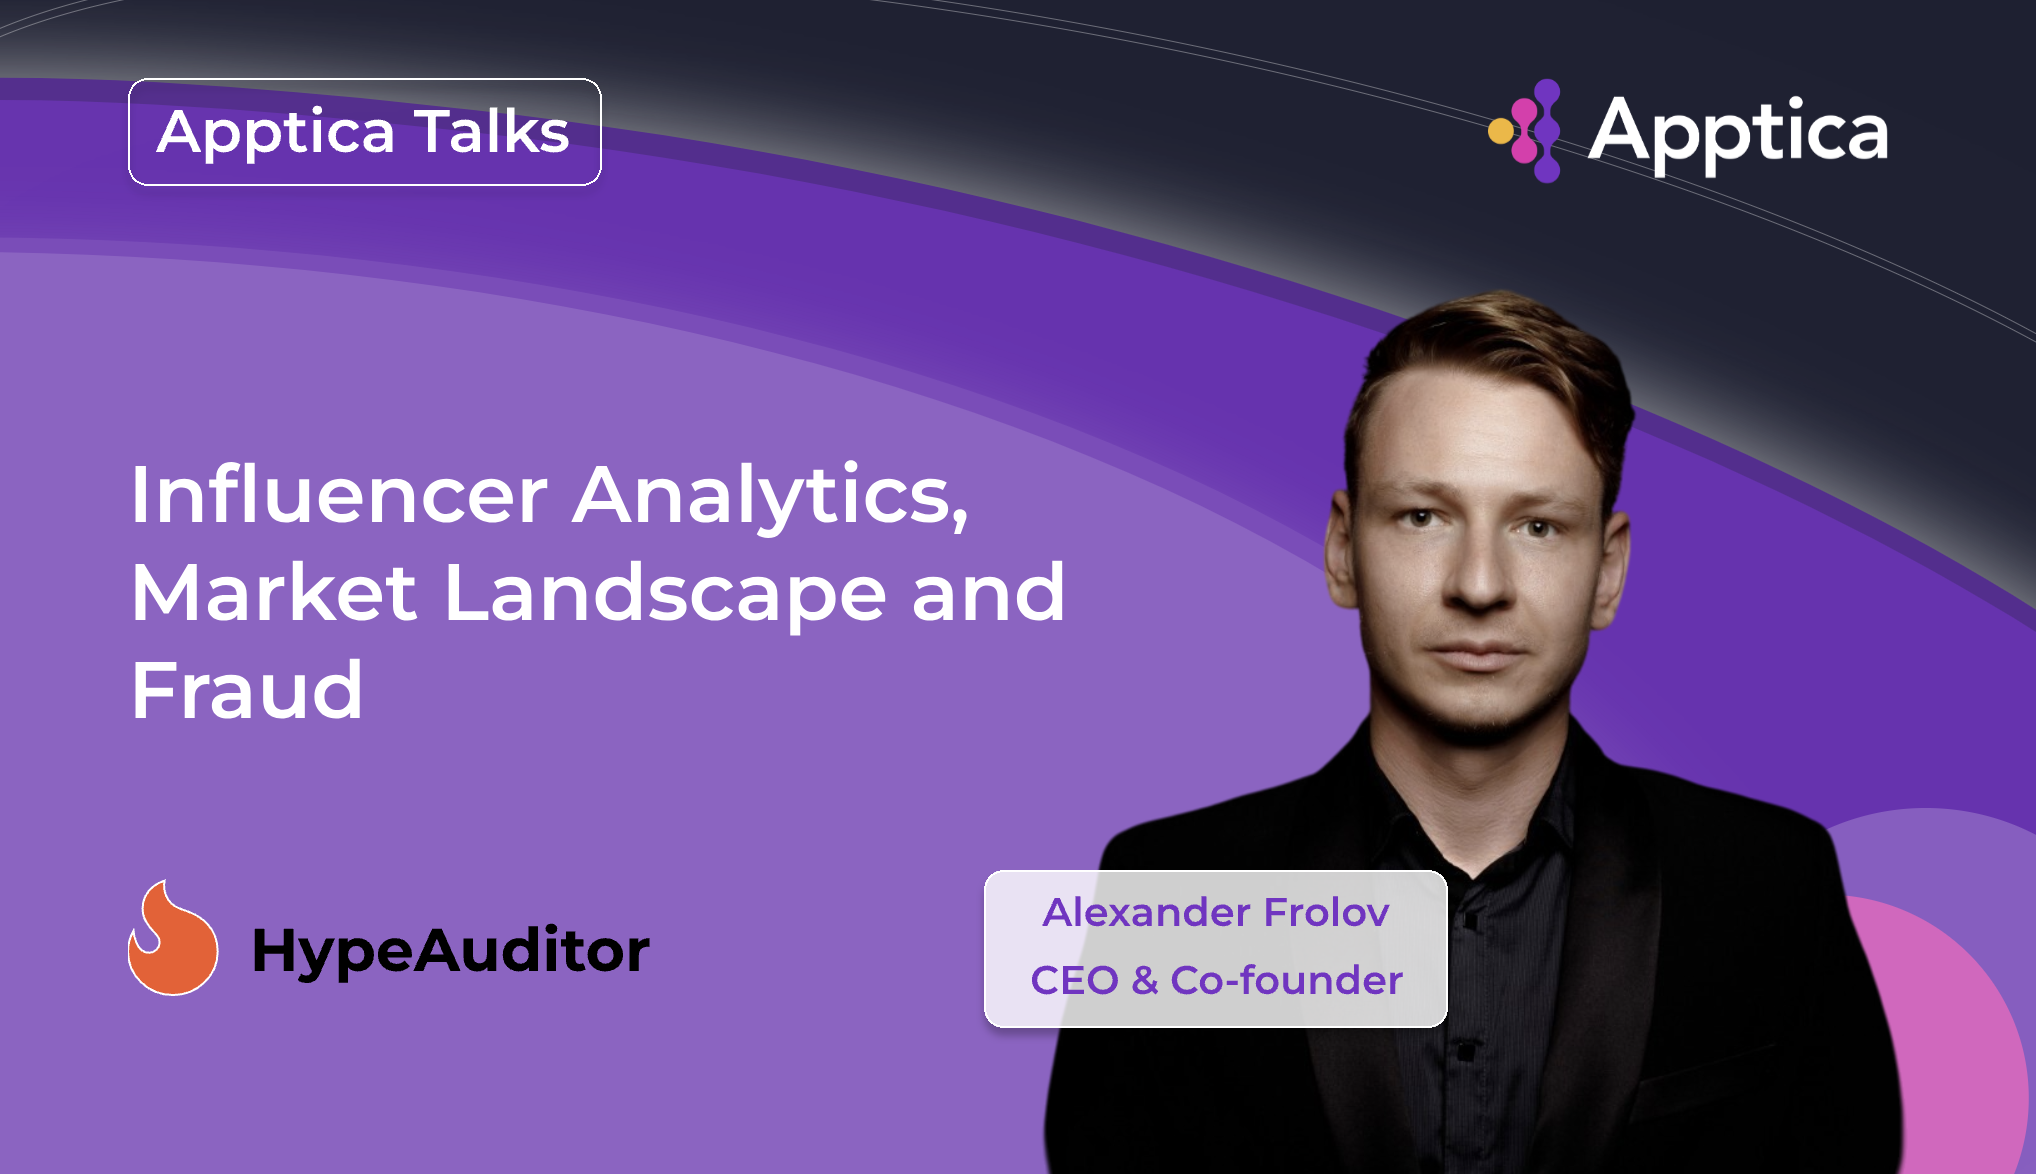 Apptica Talks. Episode #7. Influencer Analytics, Market Landscape and Fraud with Alexander Frolov from HypeAuditor